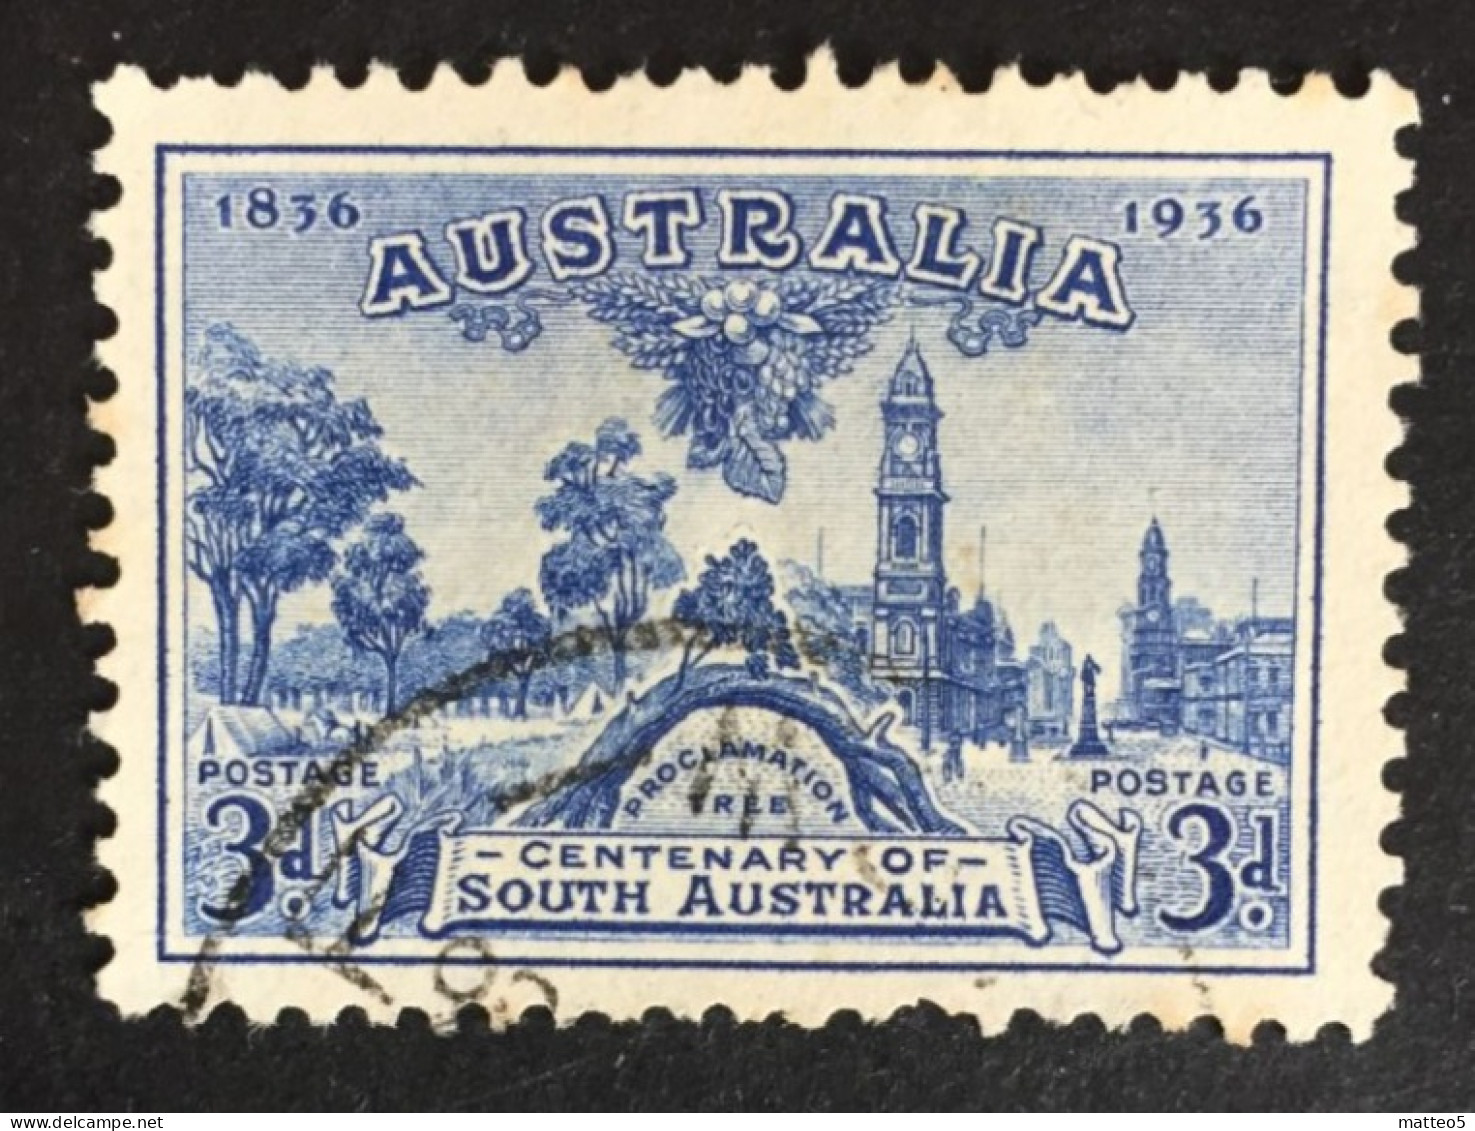 1936 Australia - Centenary Of South Australia - Proclamation Tree And Site Of Adelaide 1836 - Used - Oblitérés